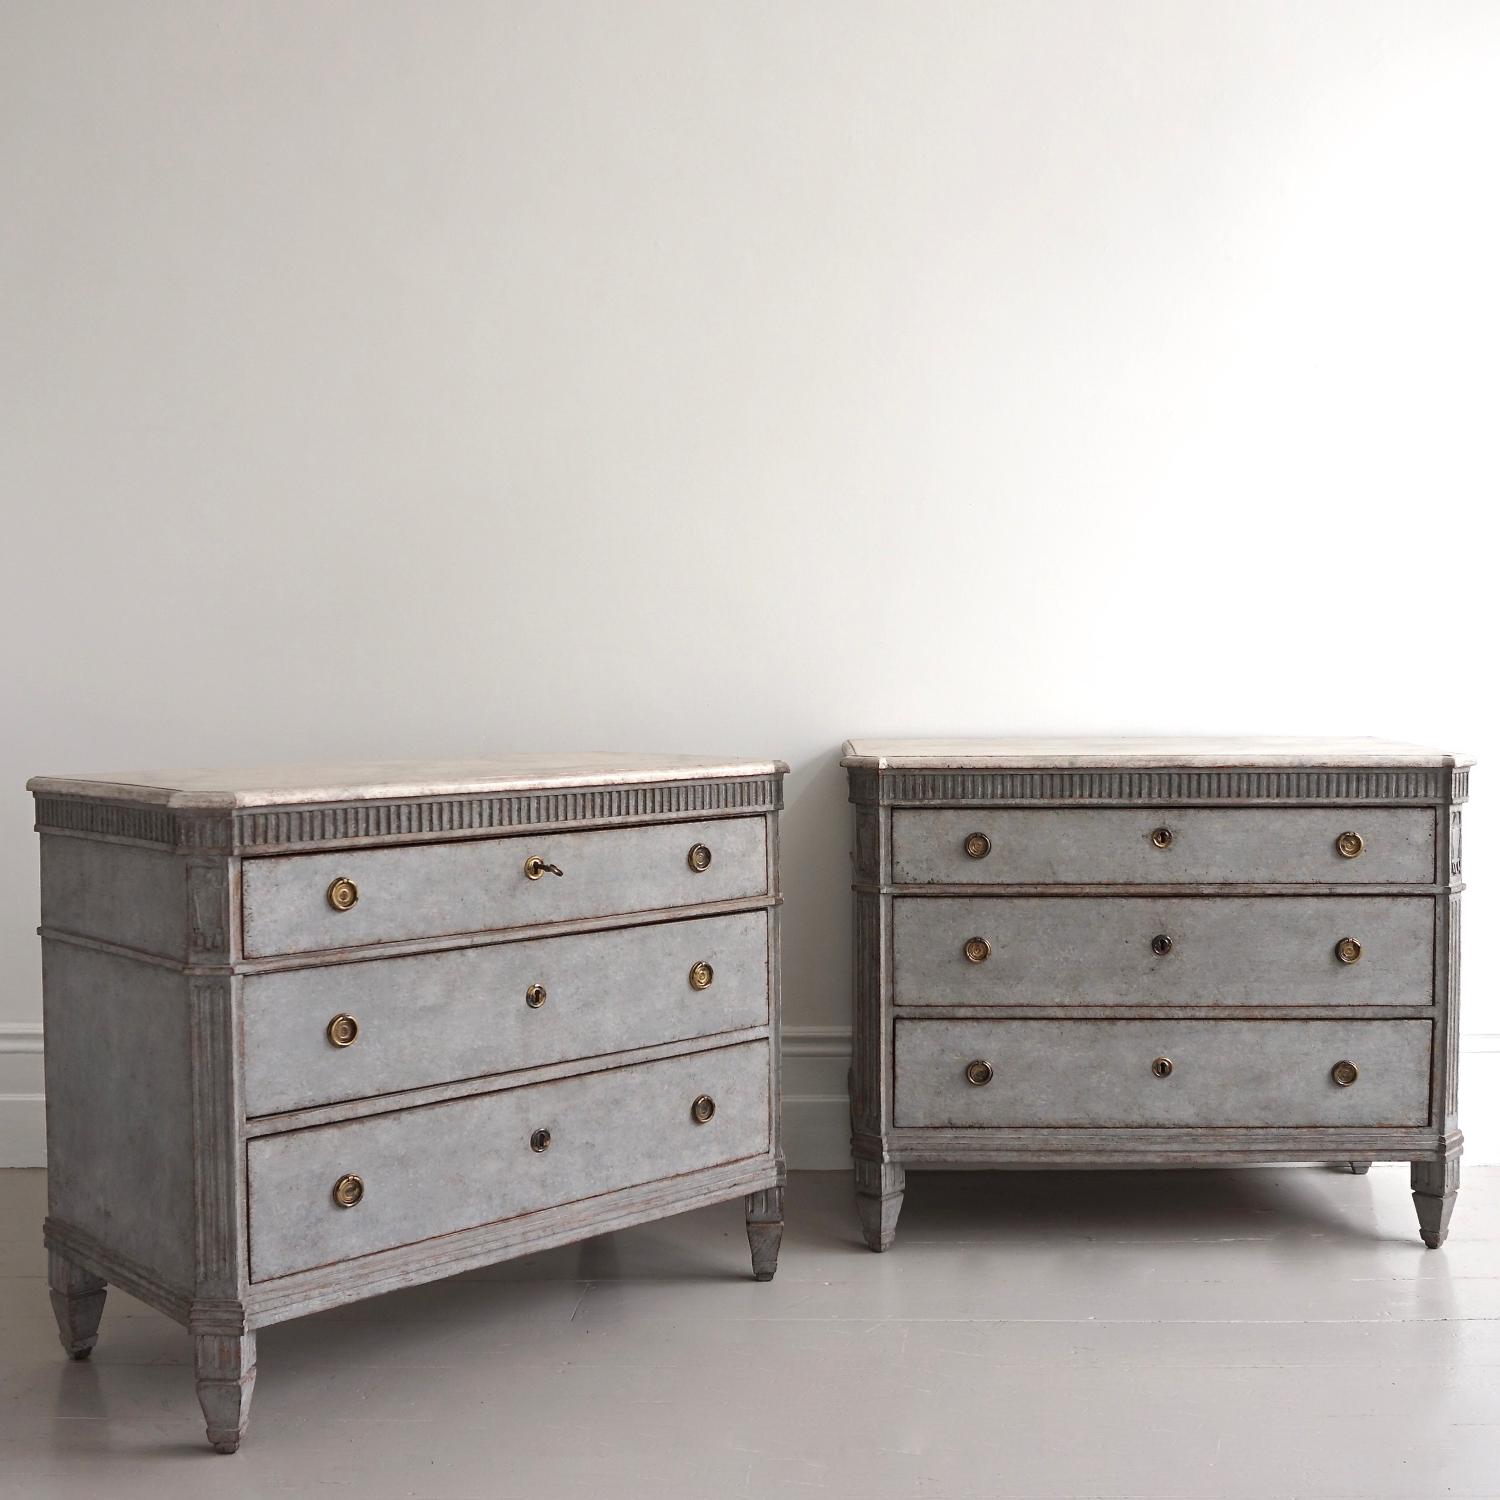 OUTSTANDING PAIR OF GUSTAVIAN STYLE CHESTS